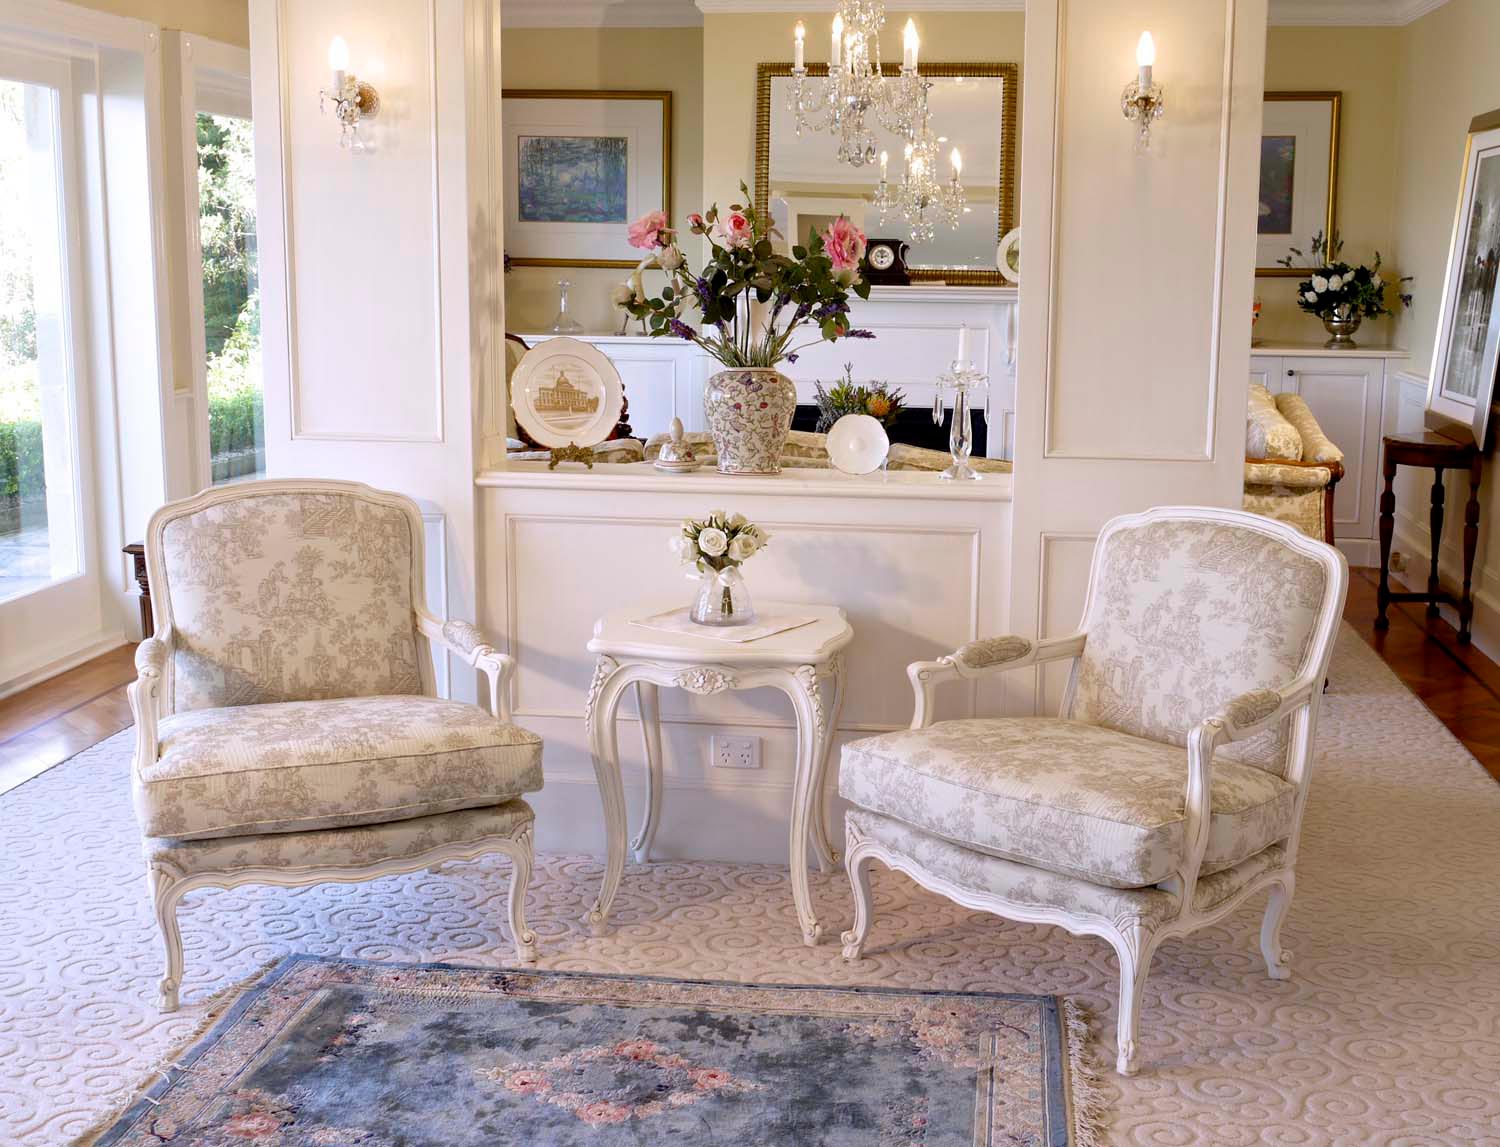 5 Two french armchairs in cream toile fabric with painted side table and wall lights